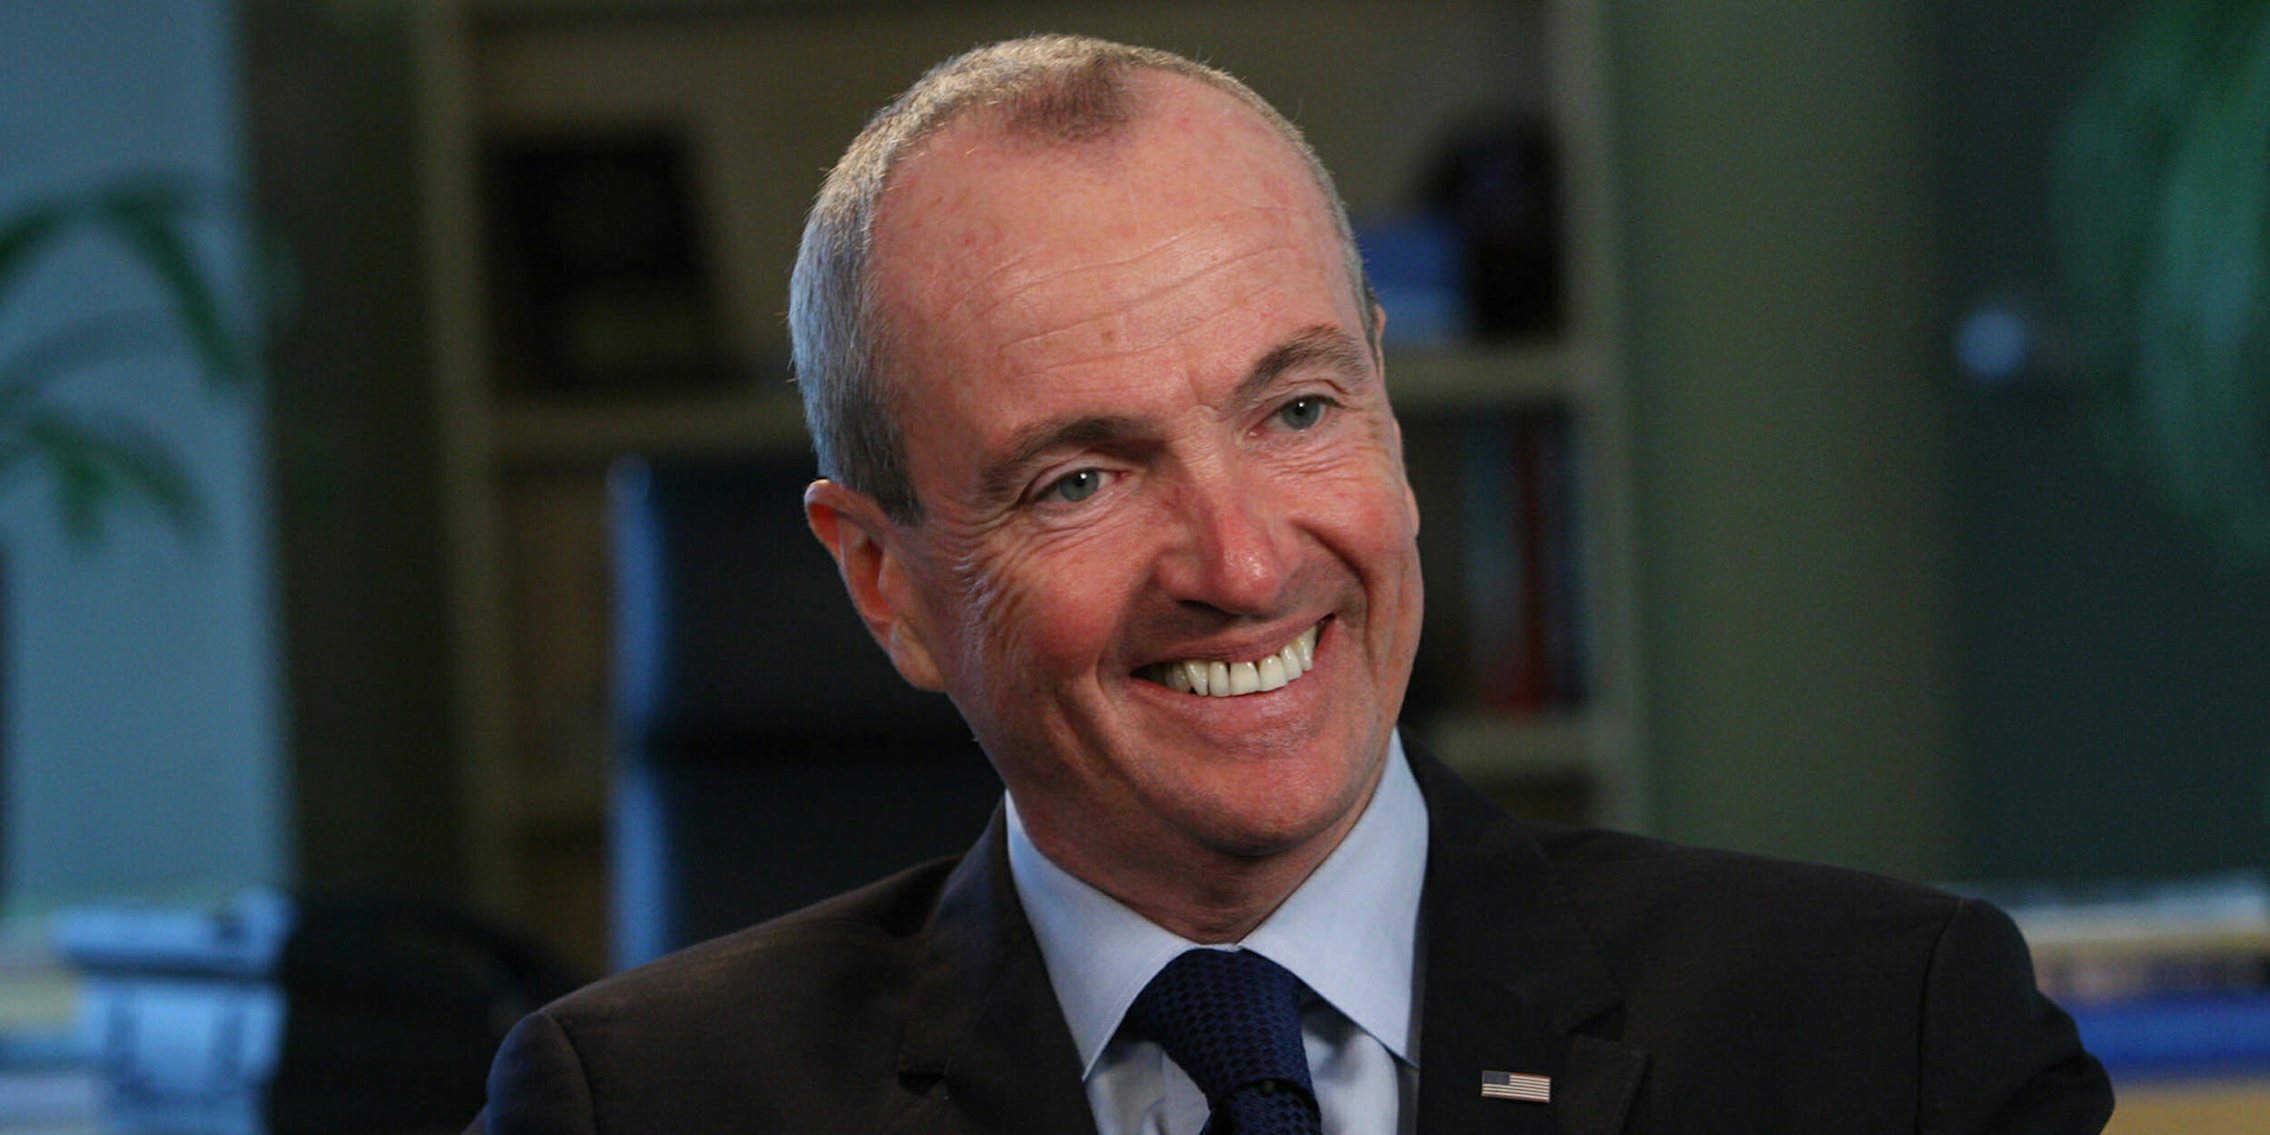 Phil Murphy was elected the next governor of New Jersey, replacing Chris Christie.